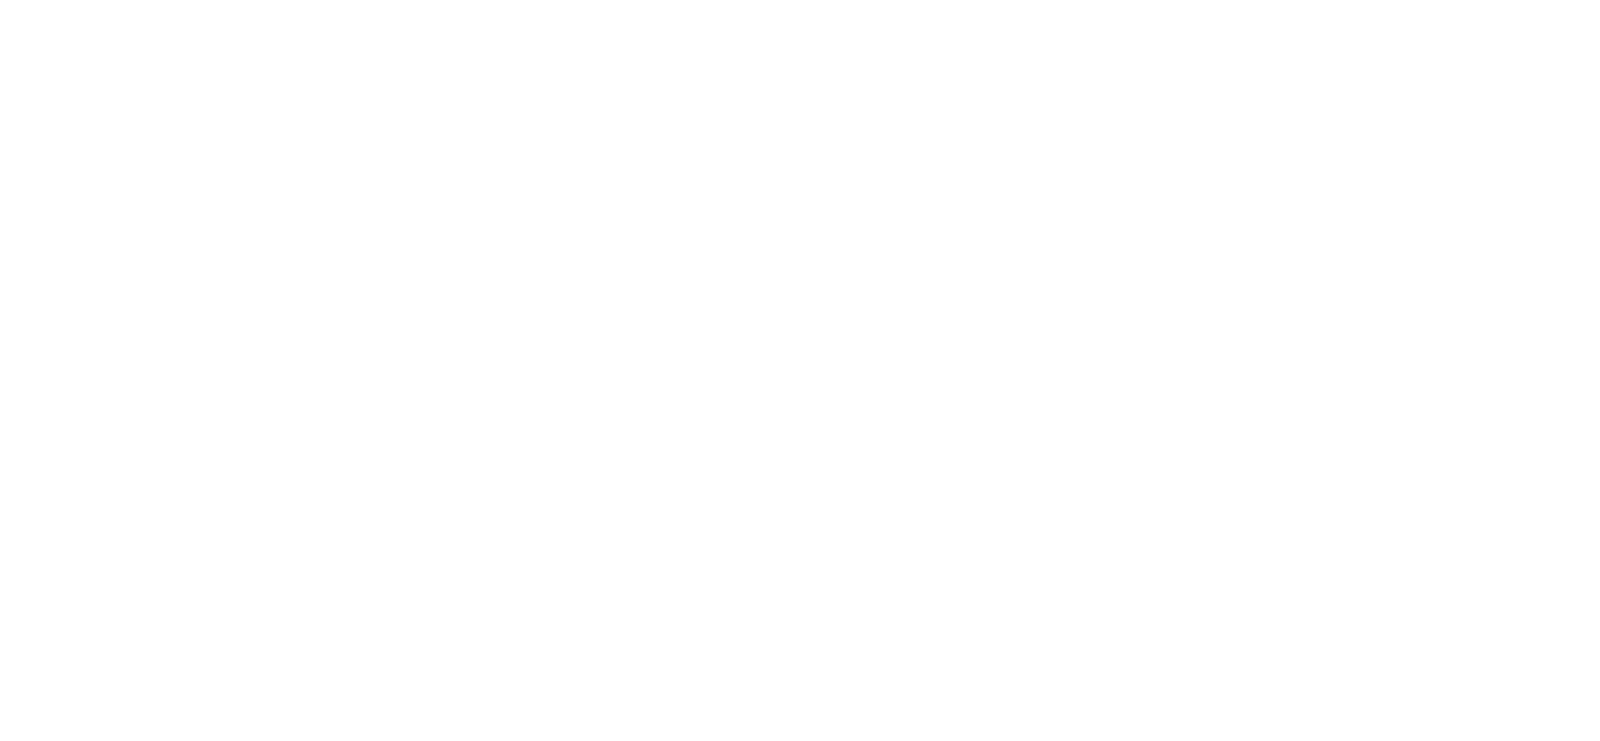 Hong Kong Exchanges & Clearing logo large for dark backgrounds (transparent PNG)